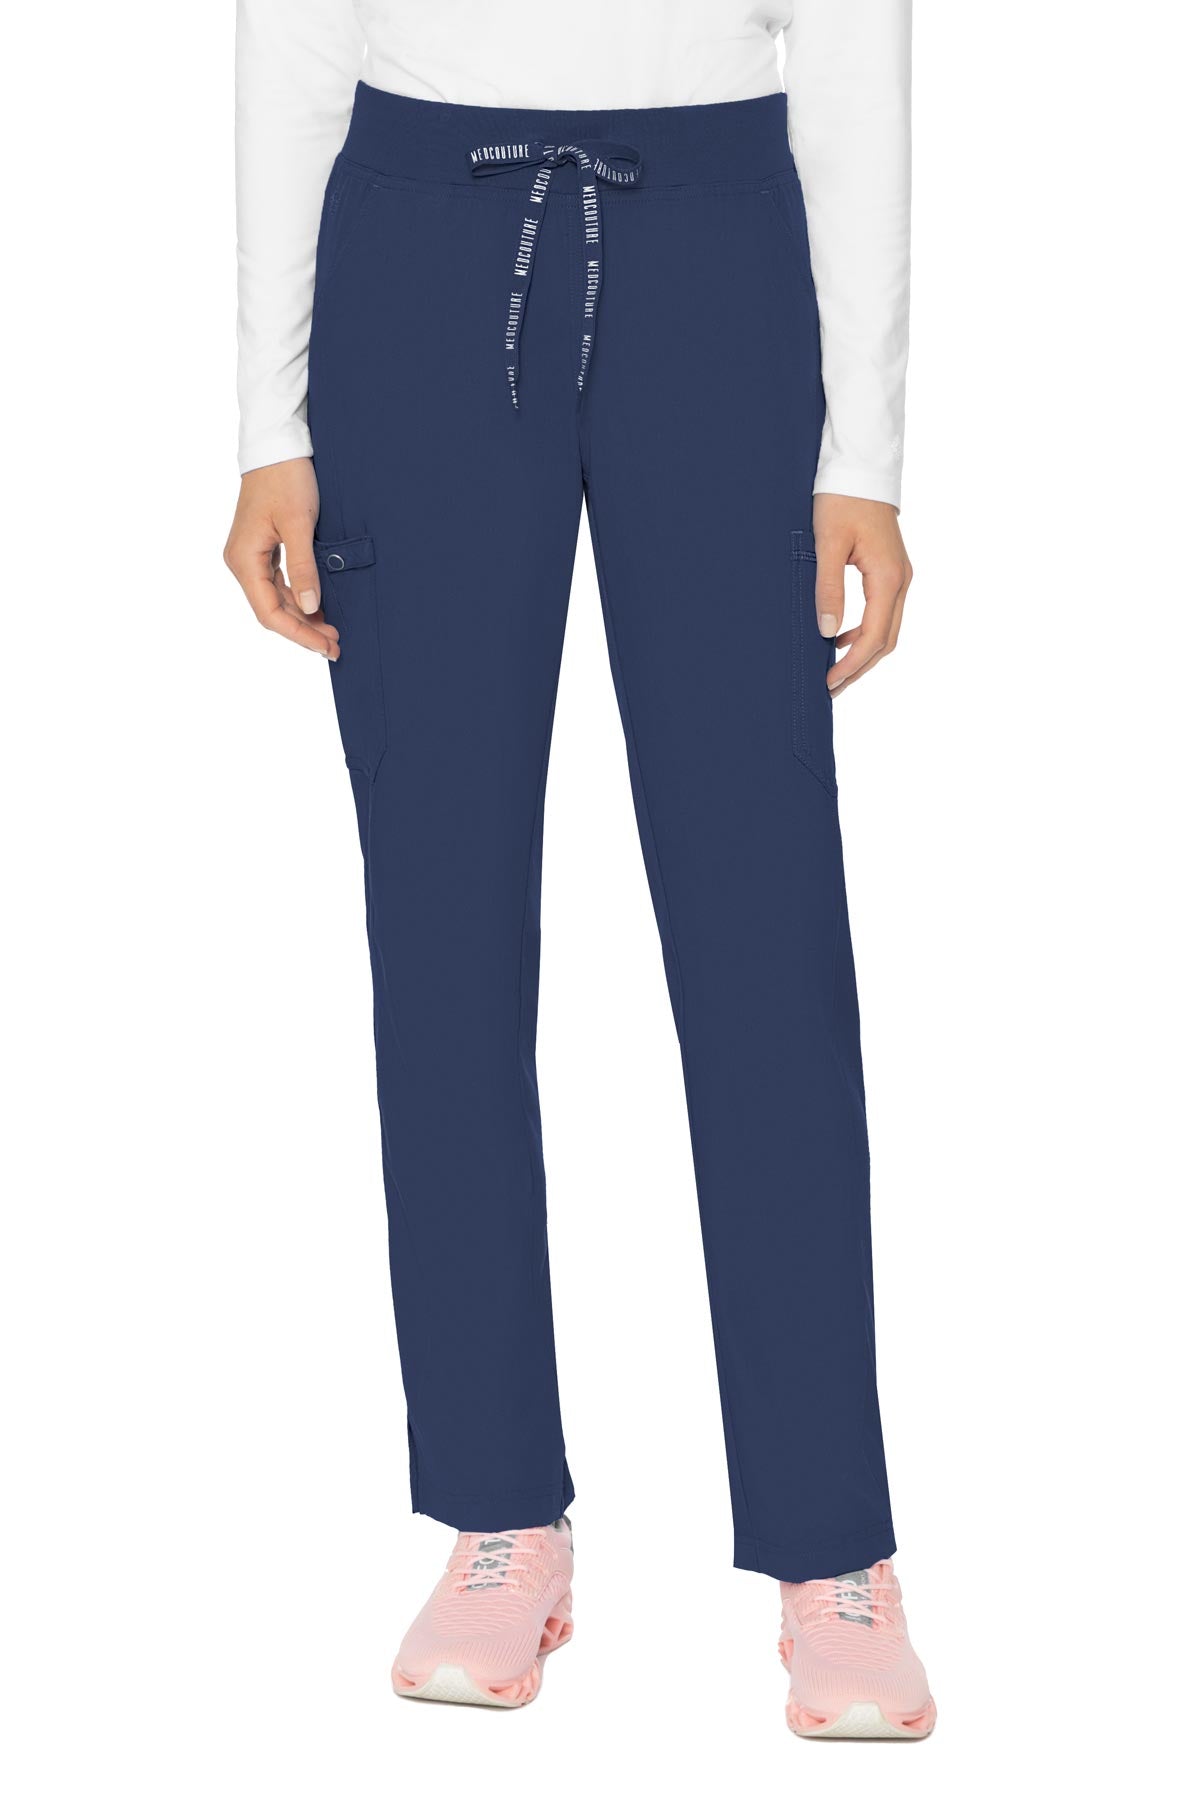 Med Couture Touch 7725 Women's Yoga 2 Cargo Pant Navy